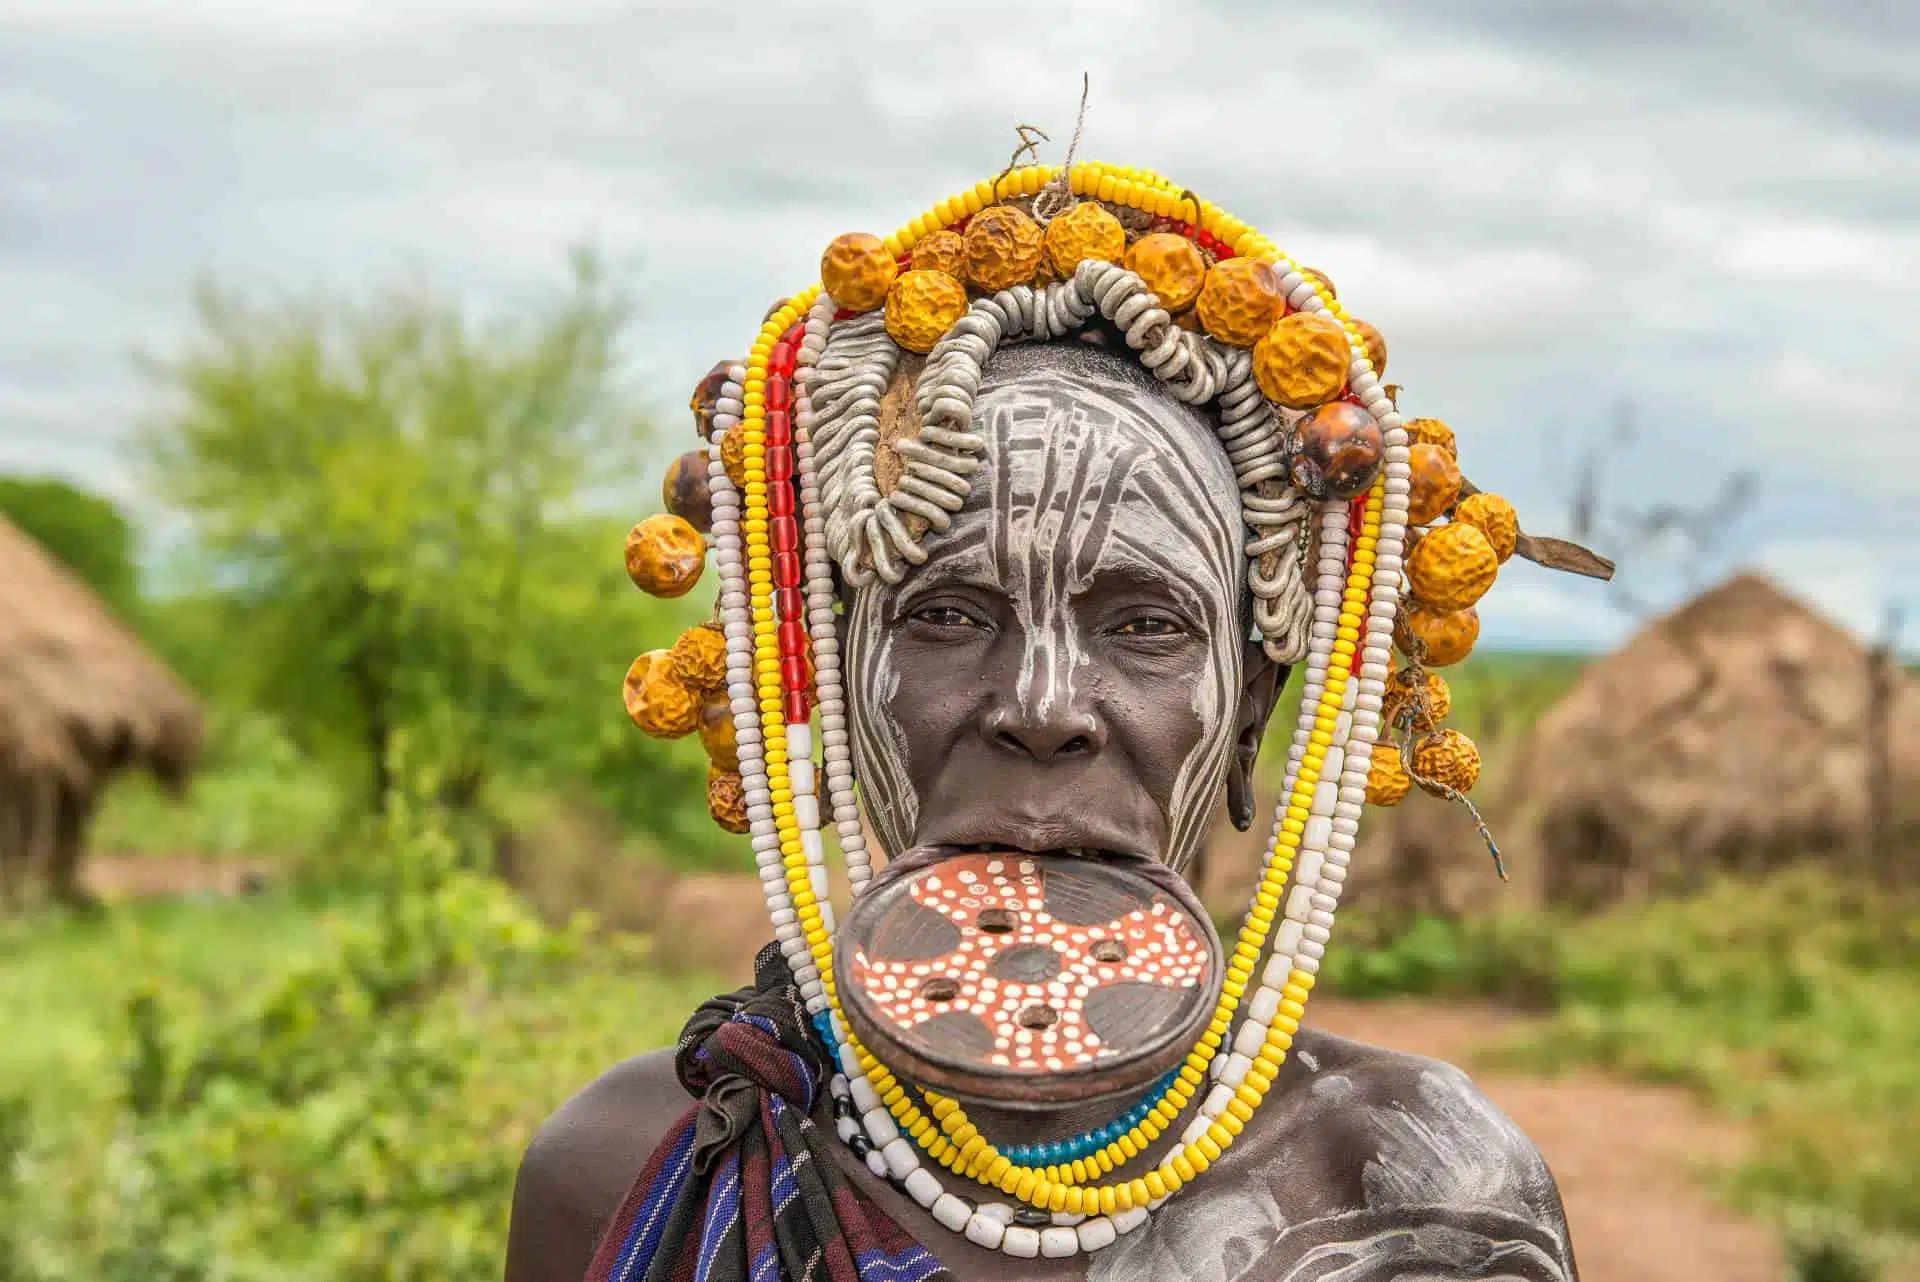 The Traditional Lip Plate Practice of the Mursi Tribe